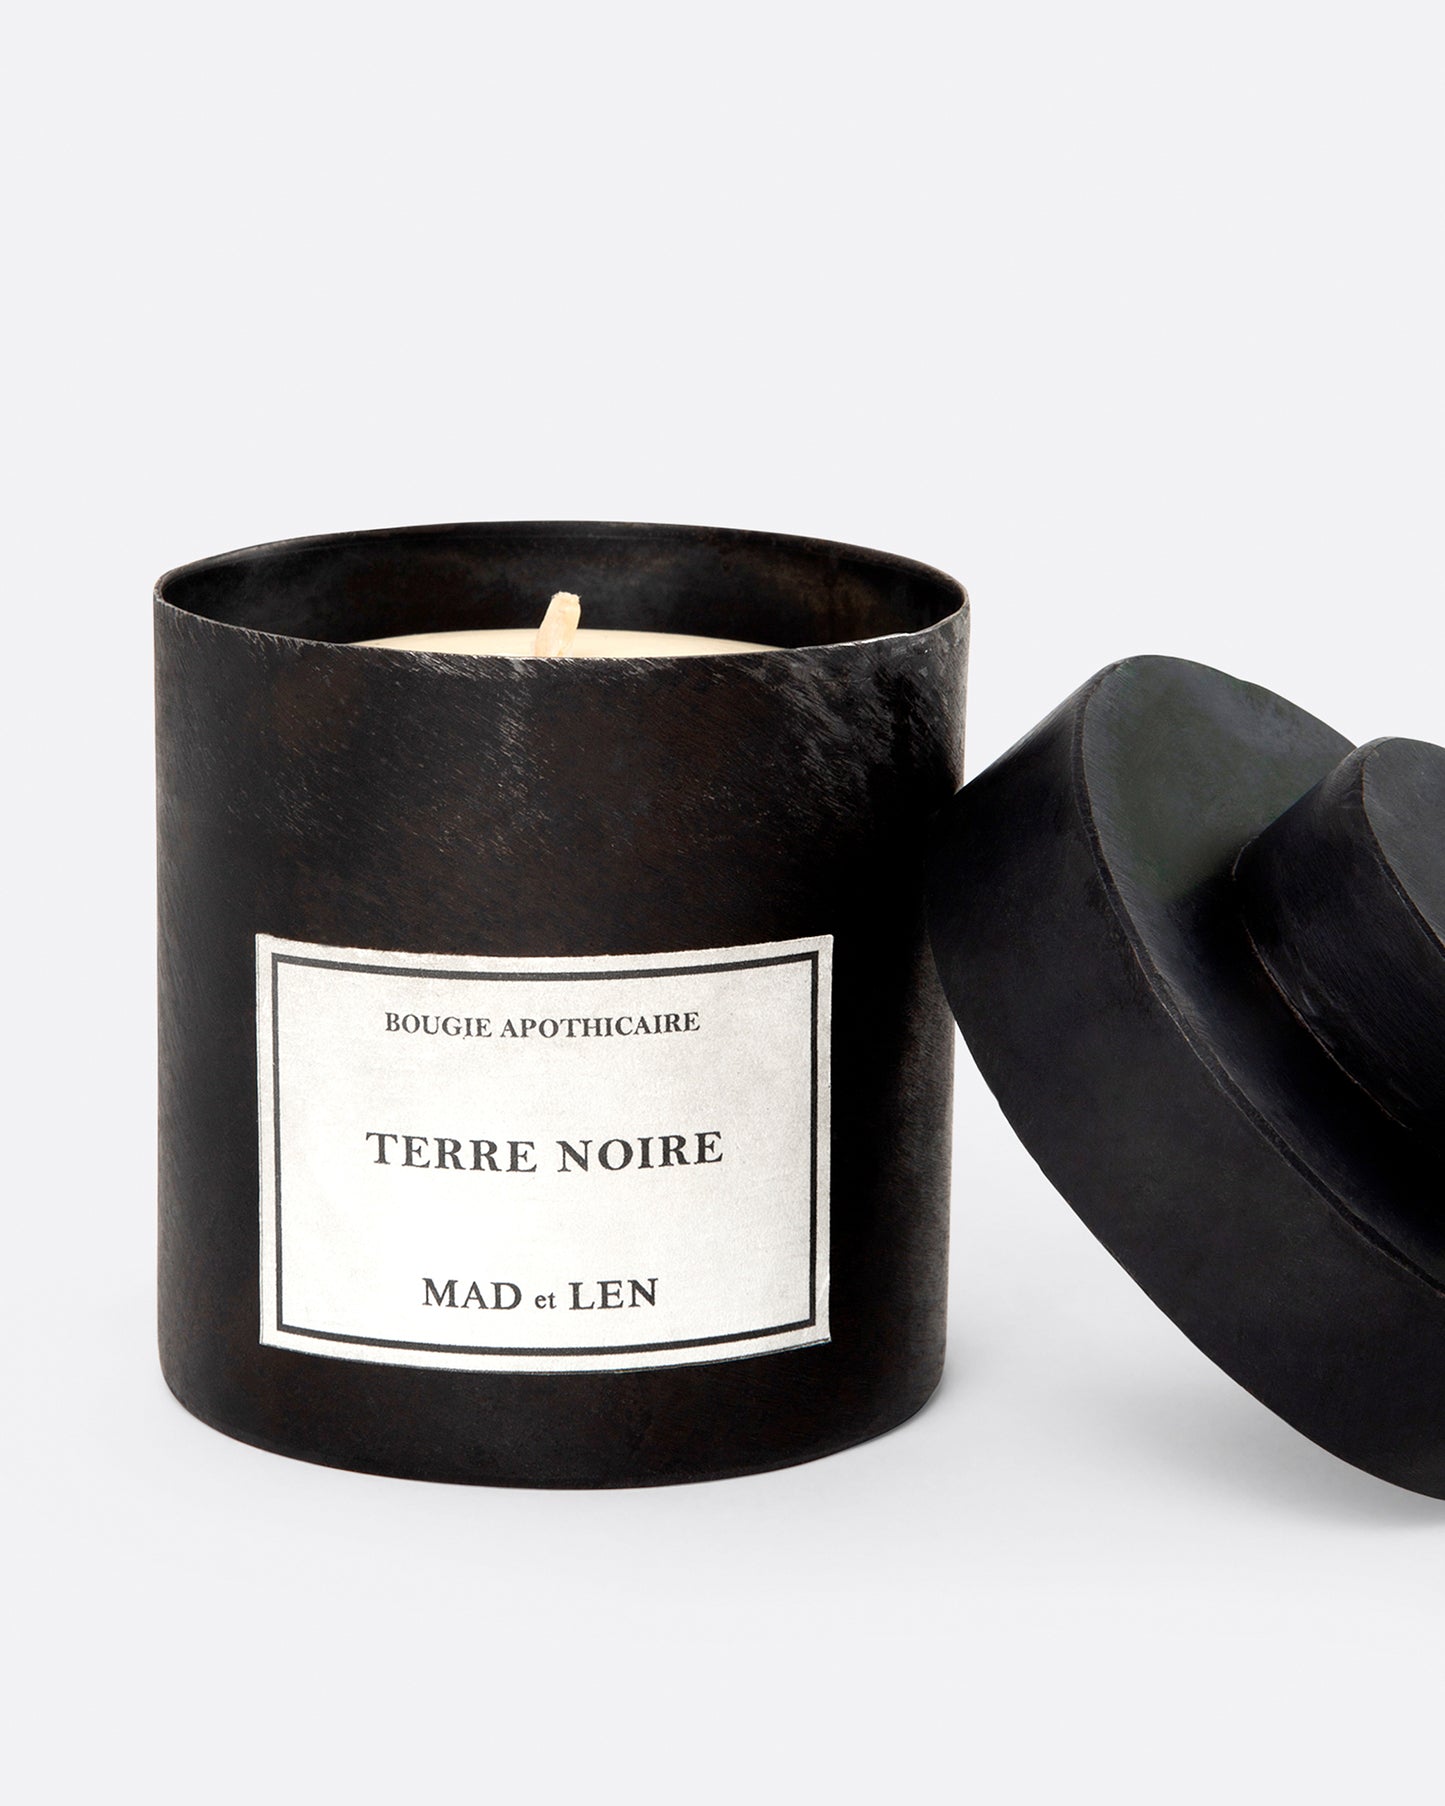 Mad et Len Terre Noire candle shown with its lid leaning against it.